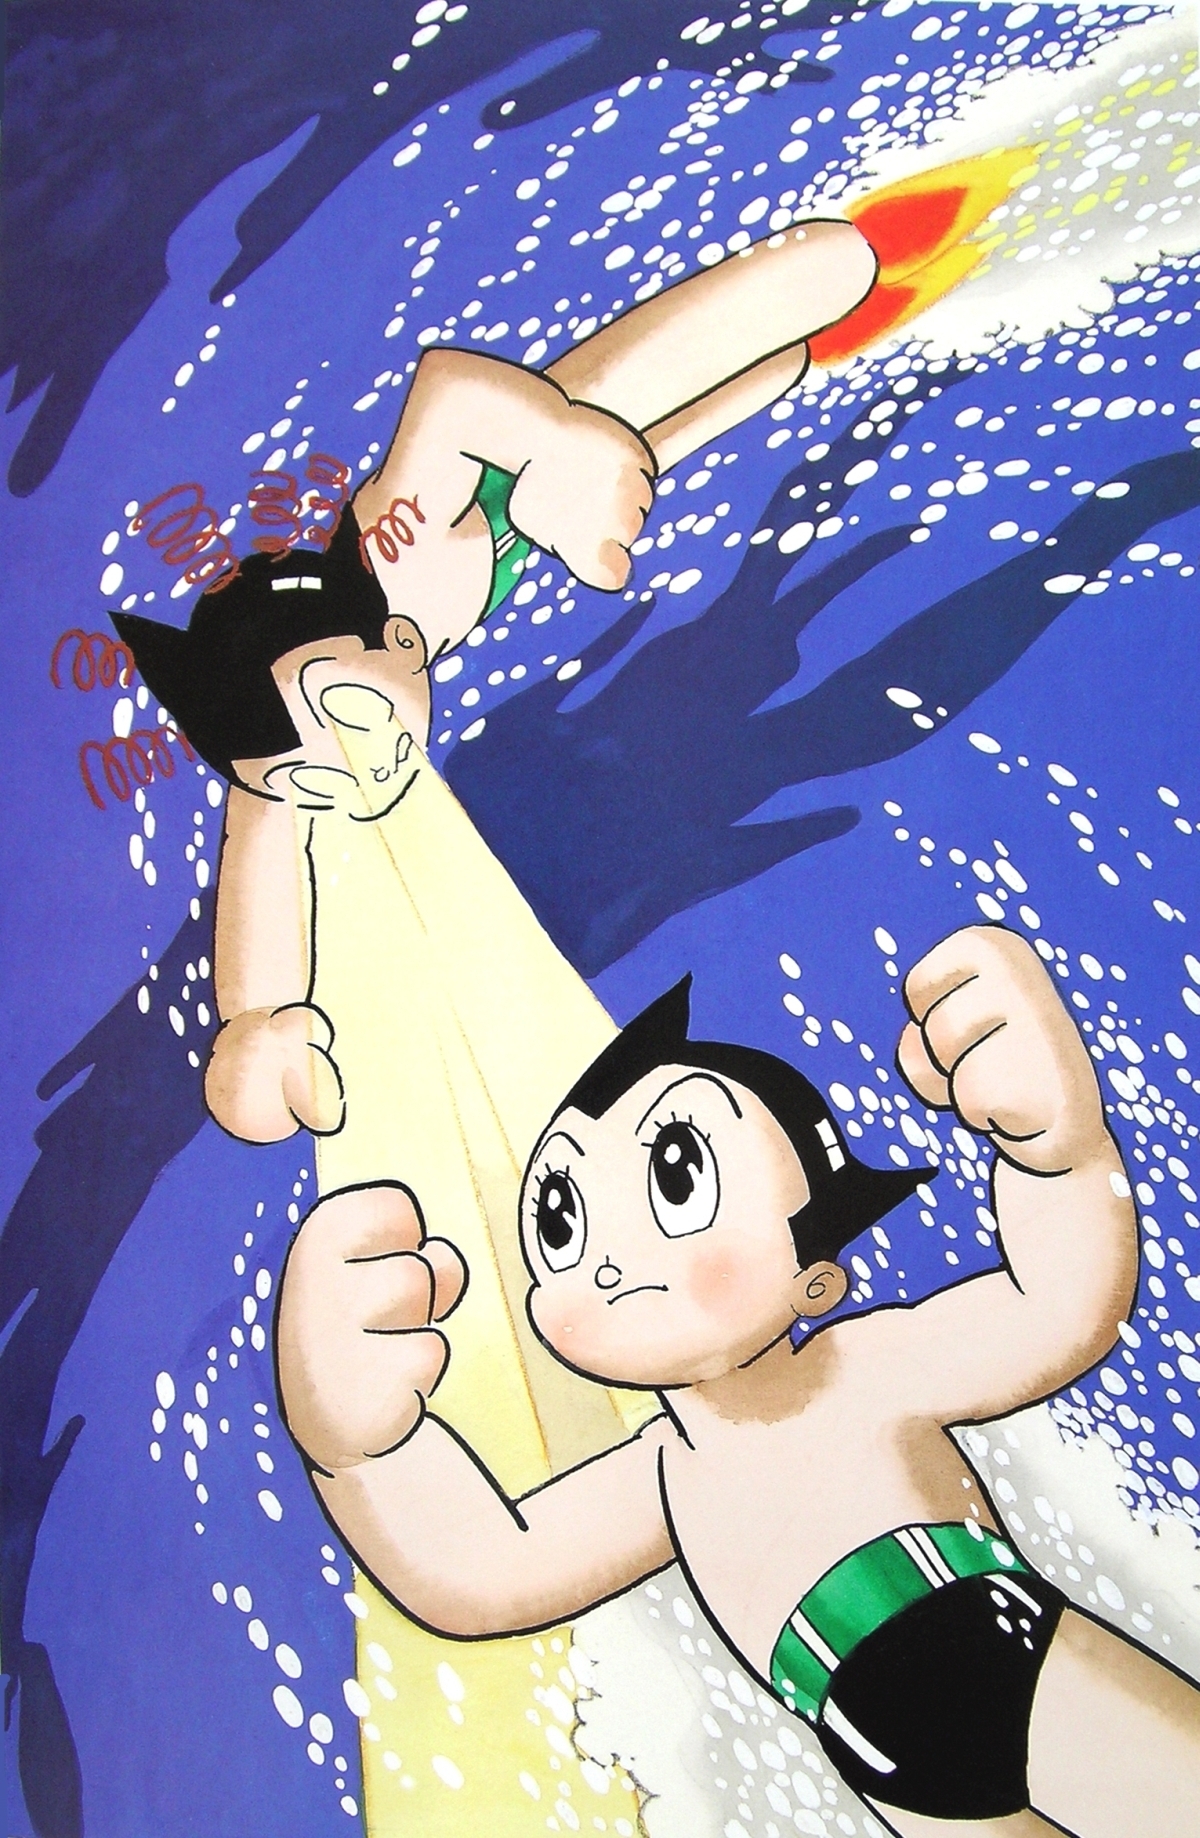 1000+ images about Astro Boy on Pinterest | Astro boy, Atoms and Pop